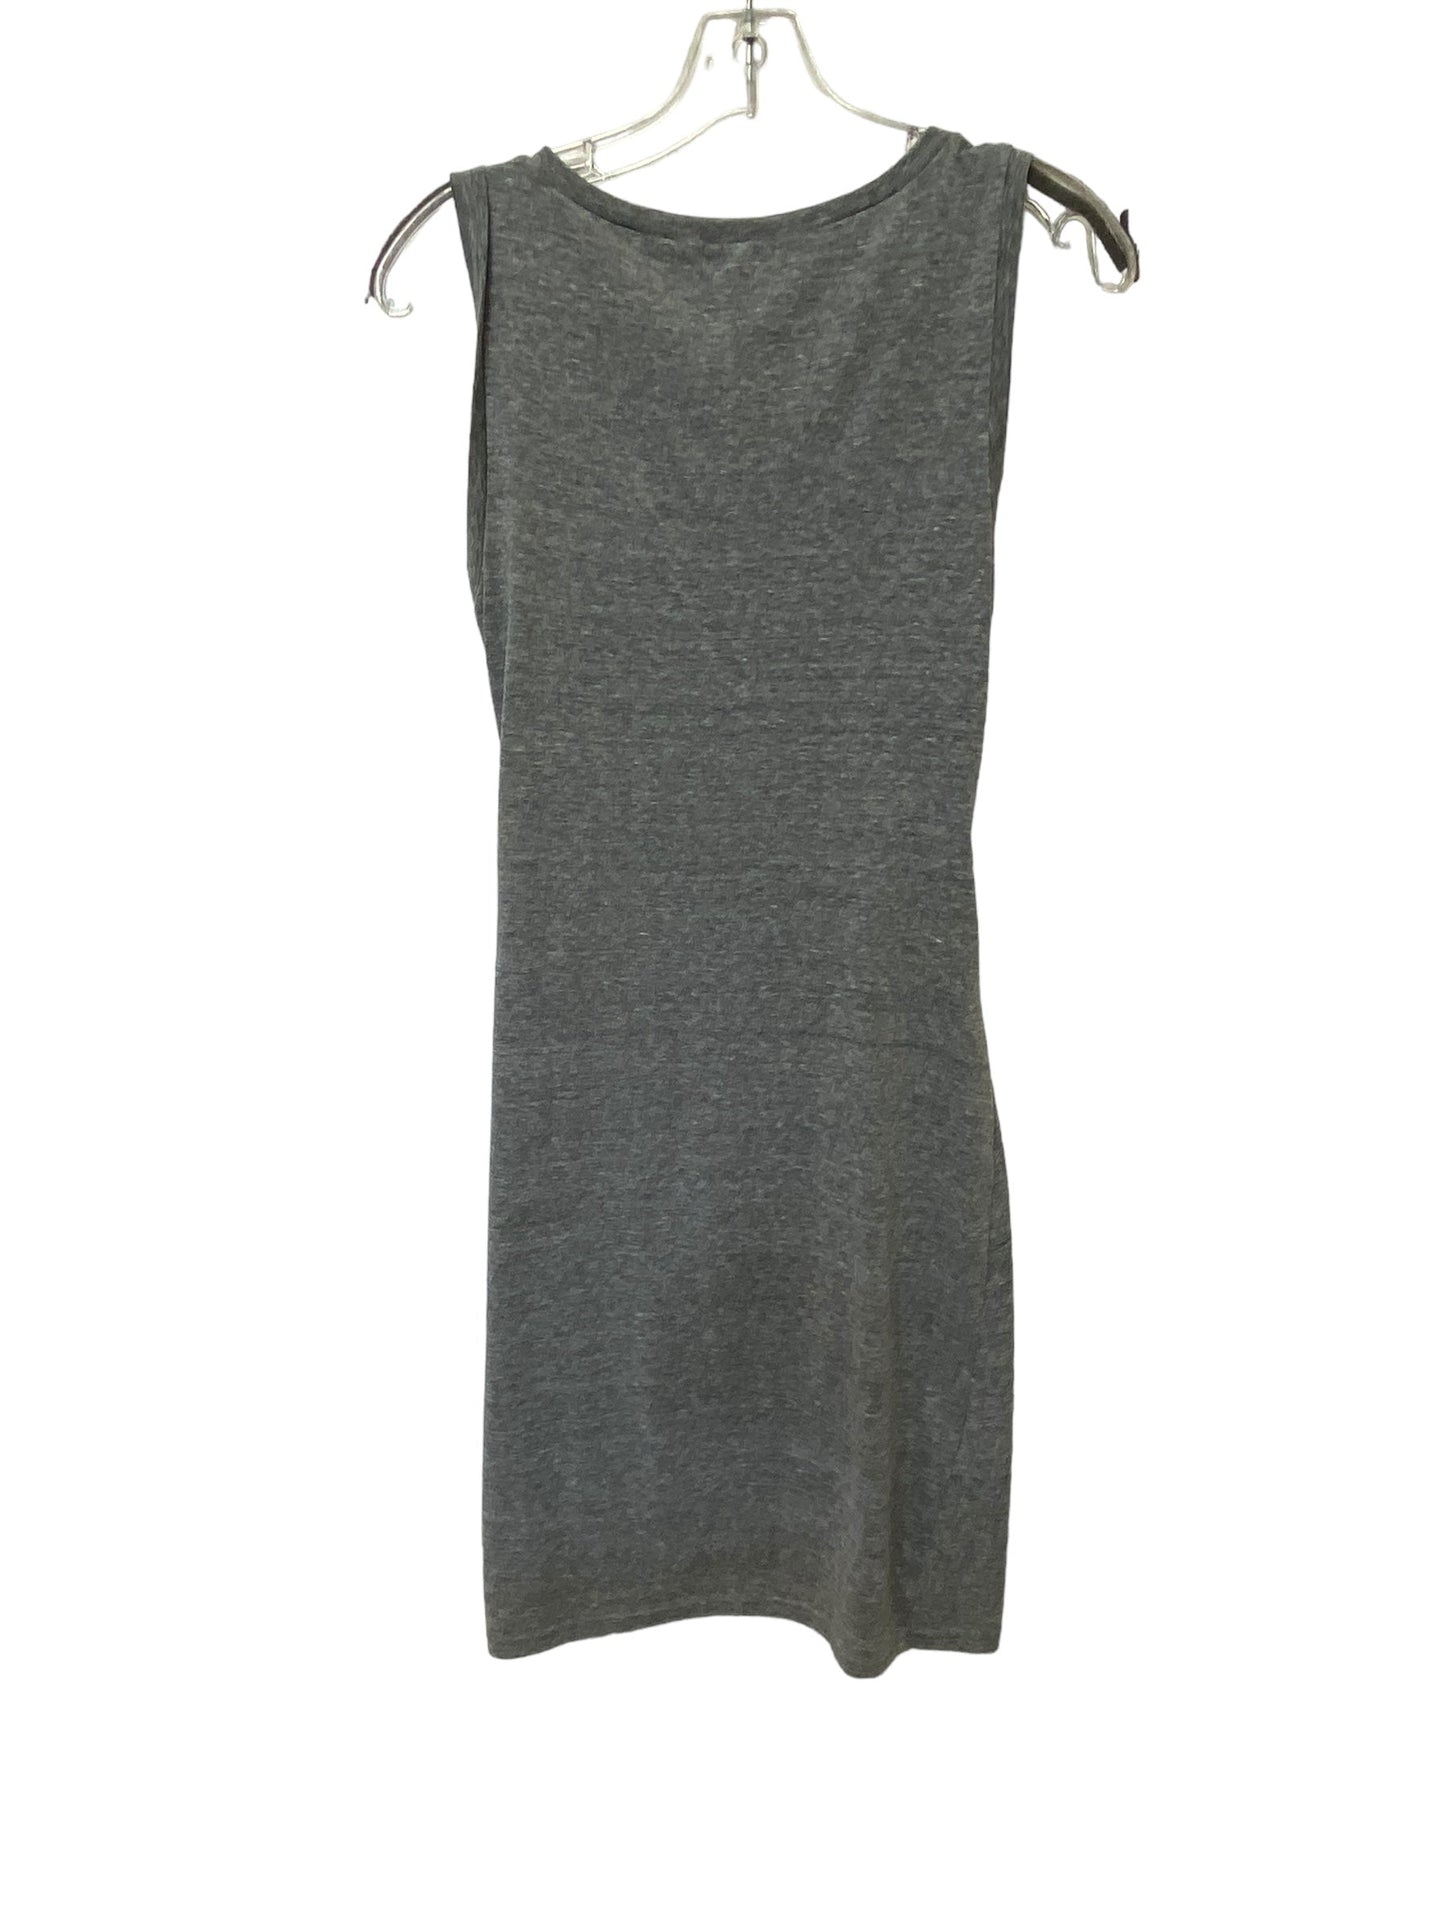 Grey Dress Casual Short Leith, Size M